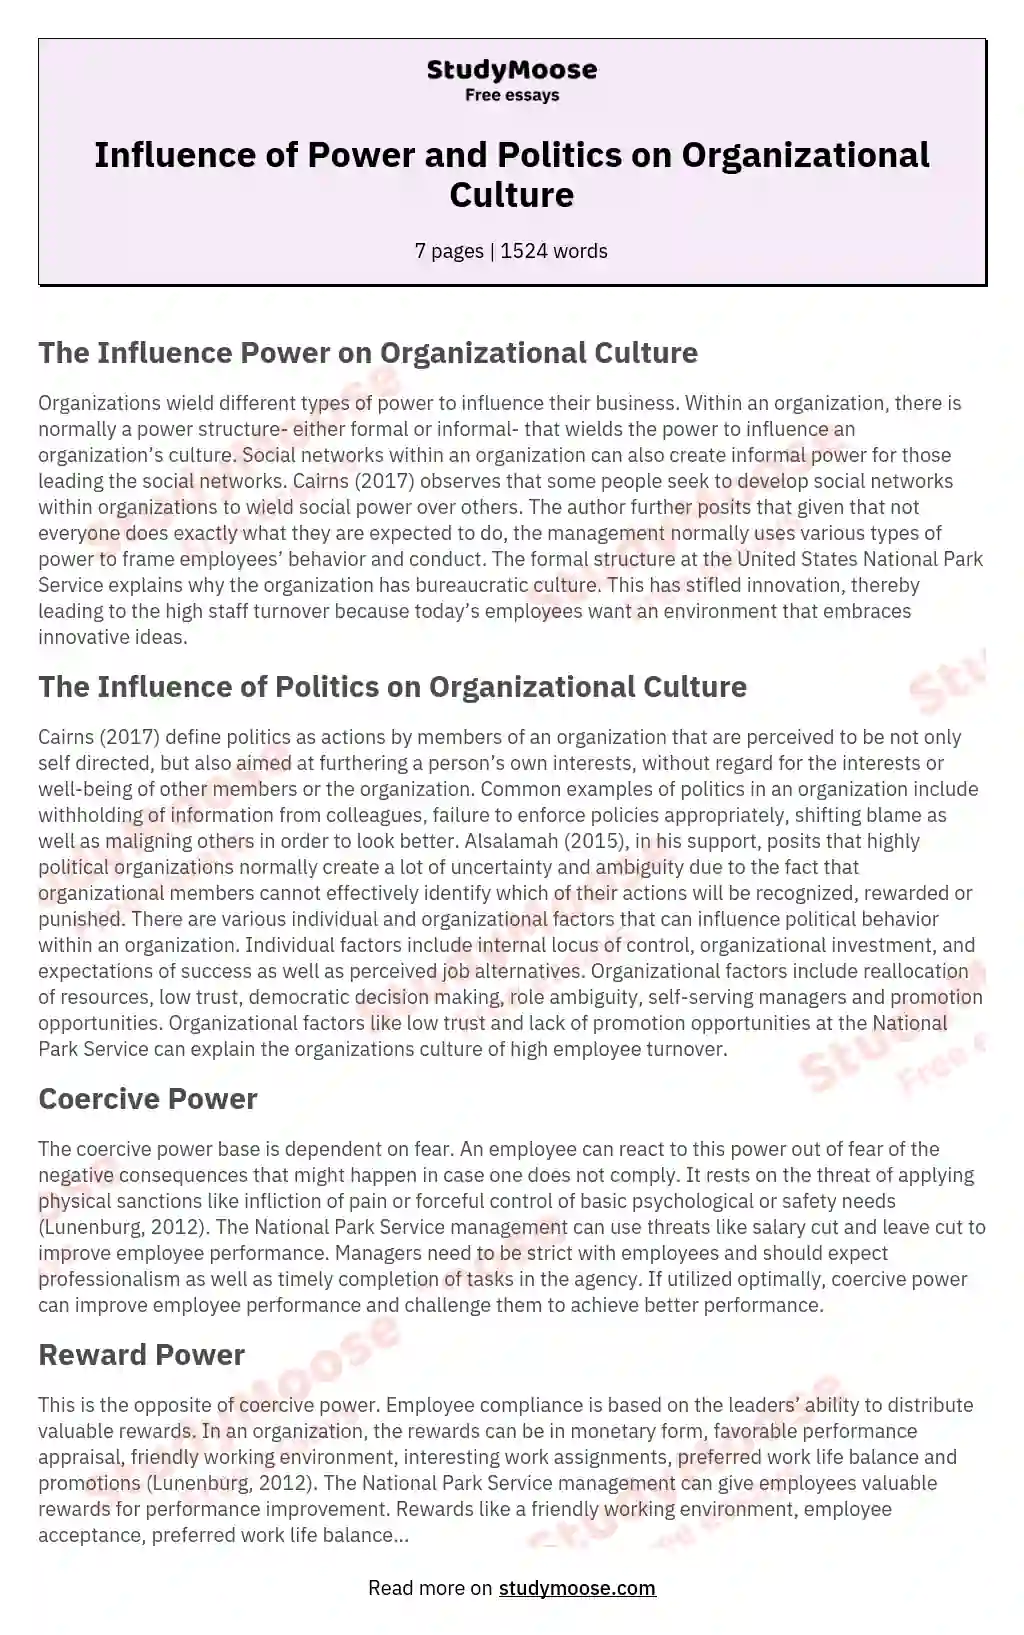 Influence of Power and Politics on Organizational Culture essay